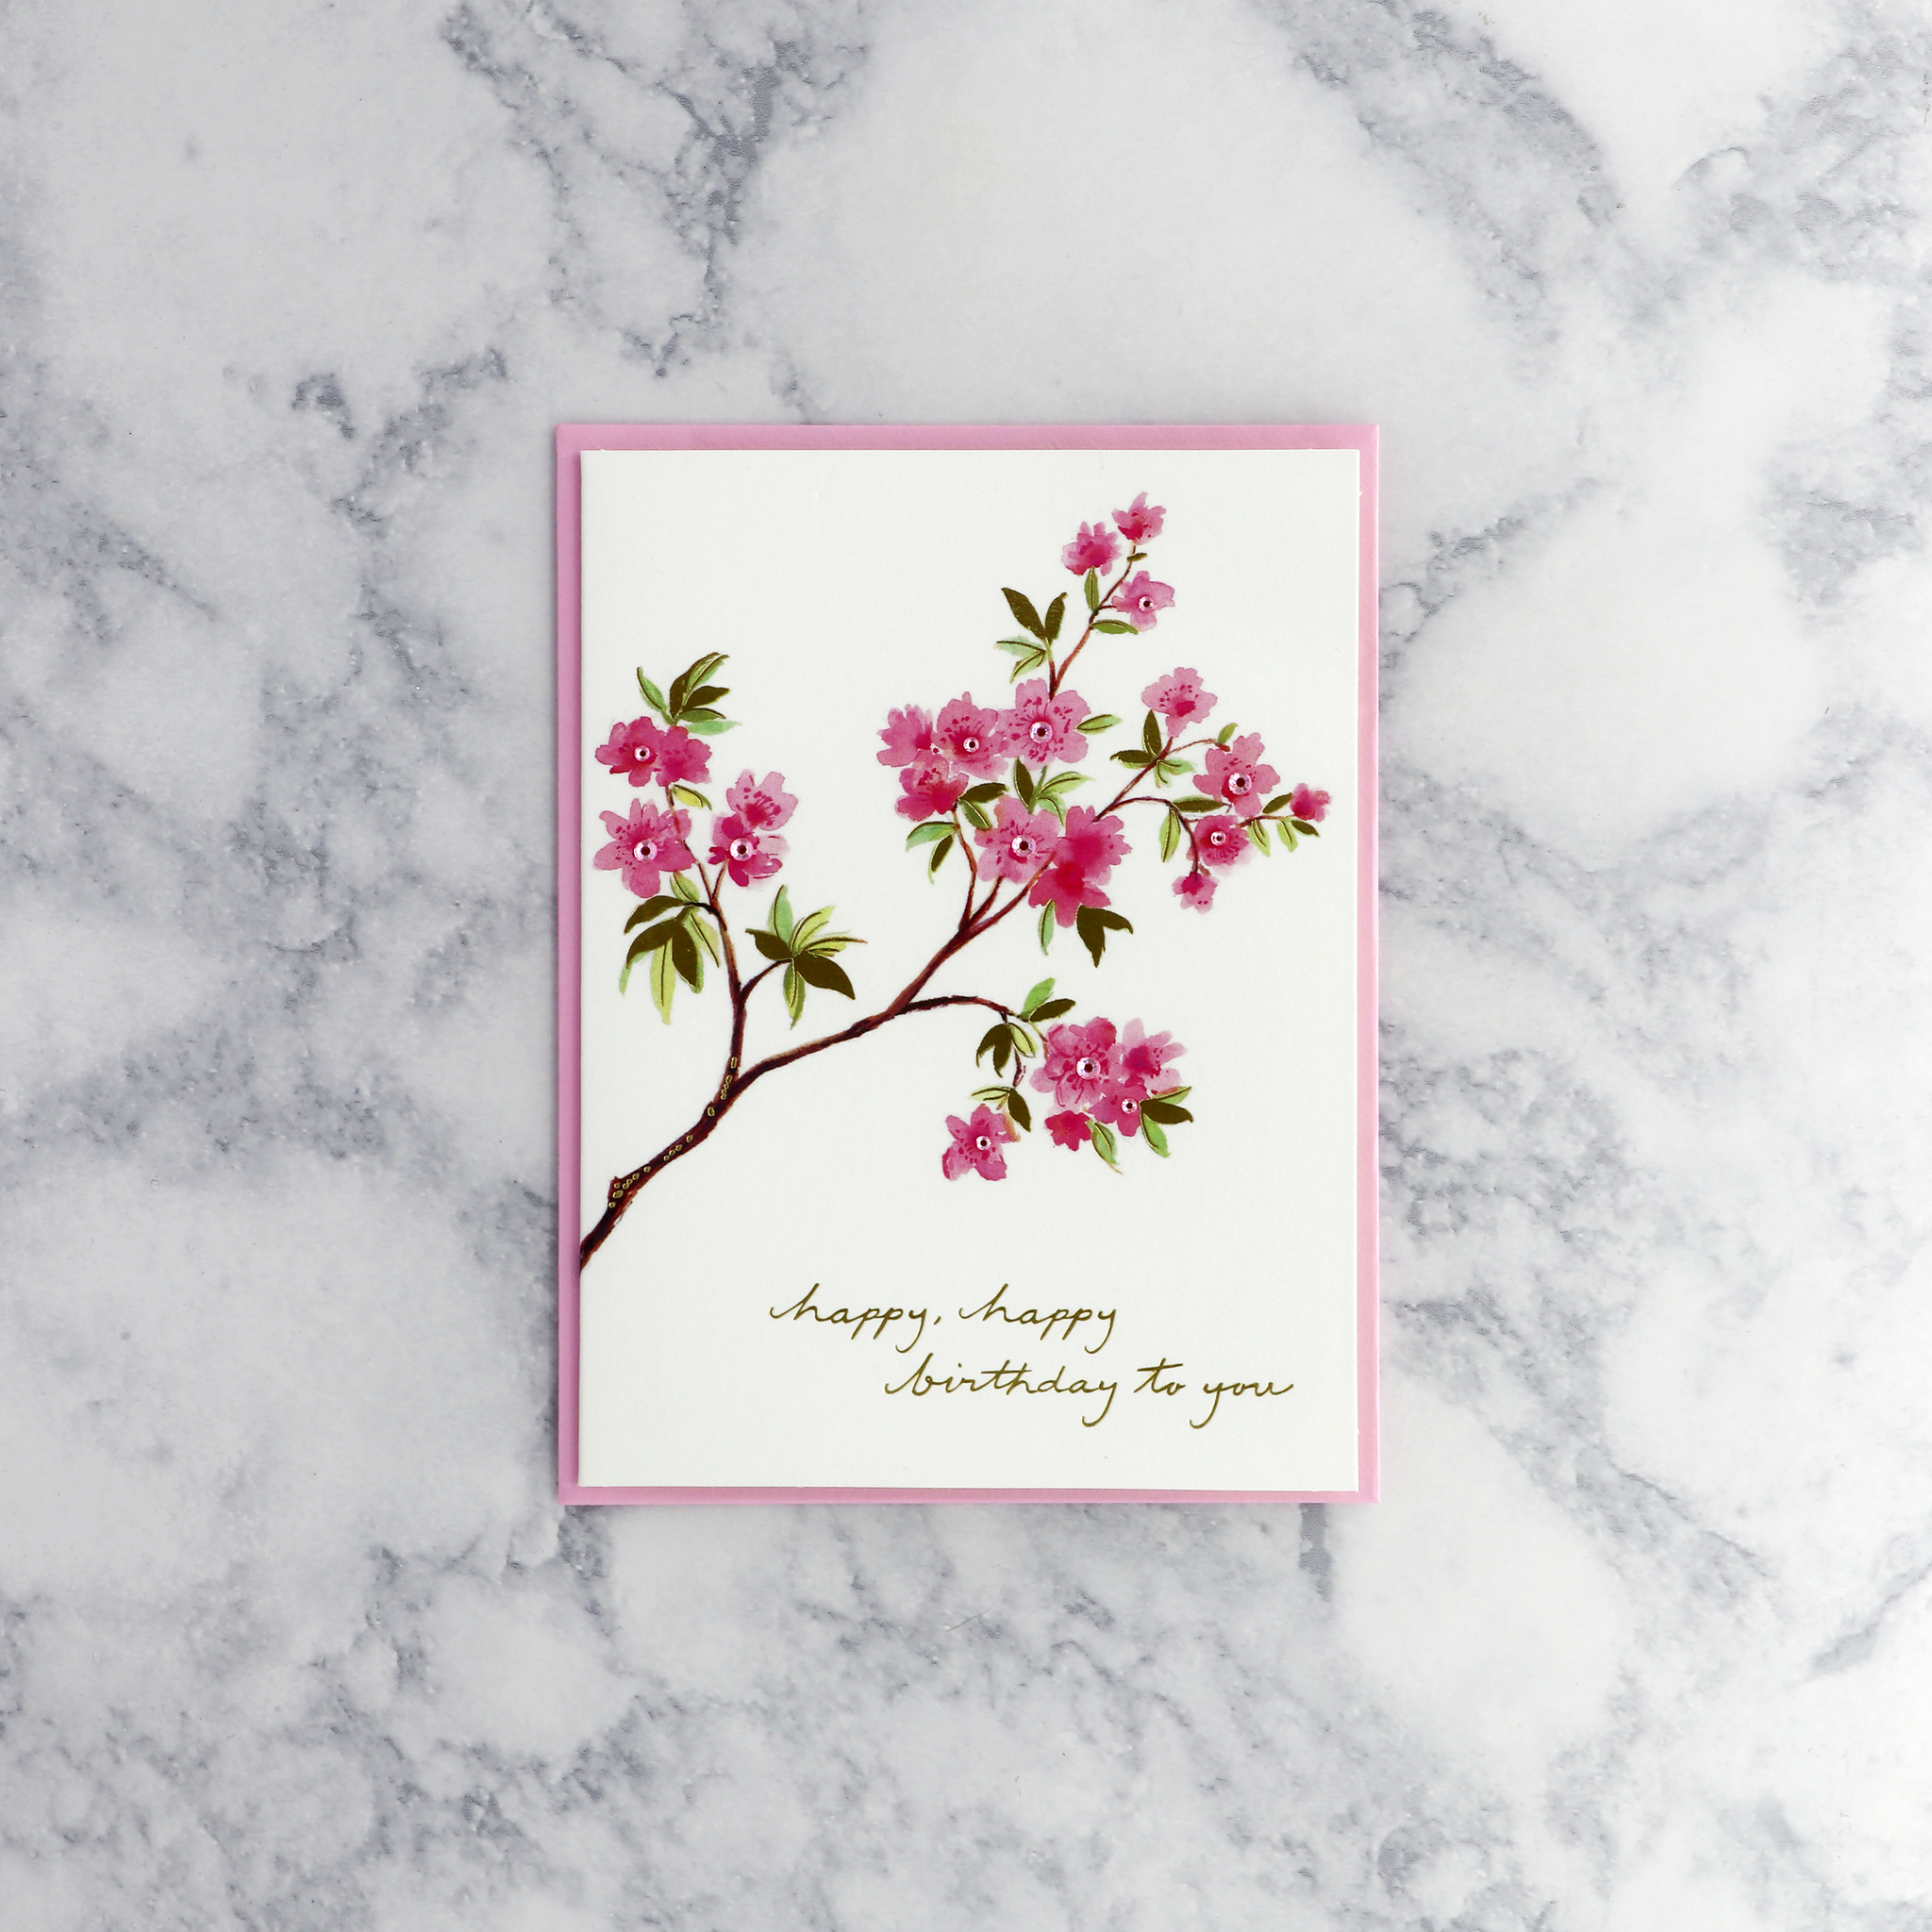 Watercolor Cherry Blossoms Birthday Card